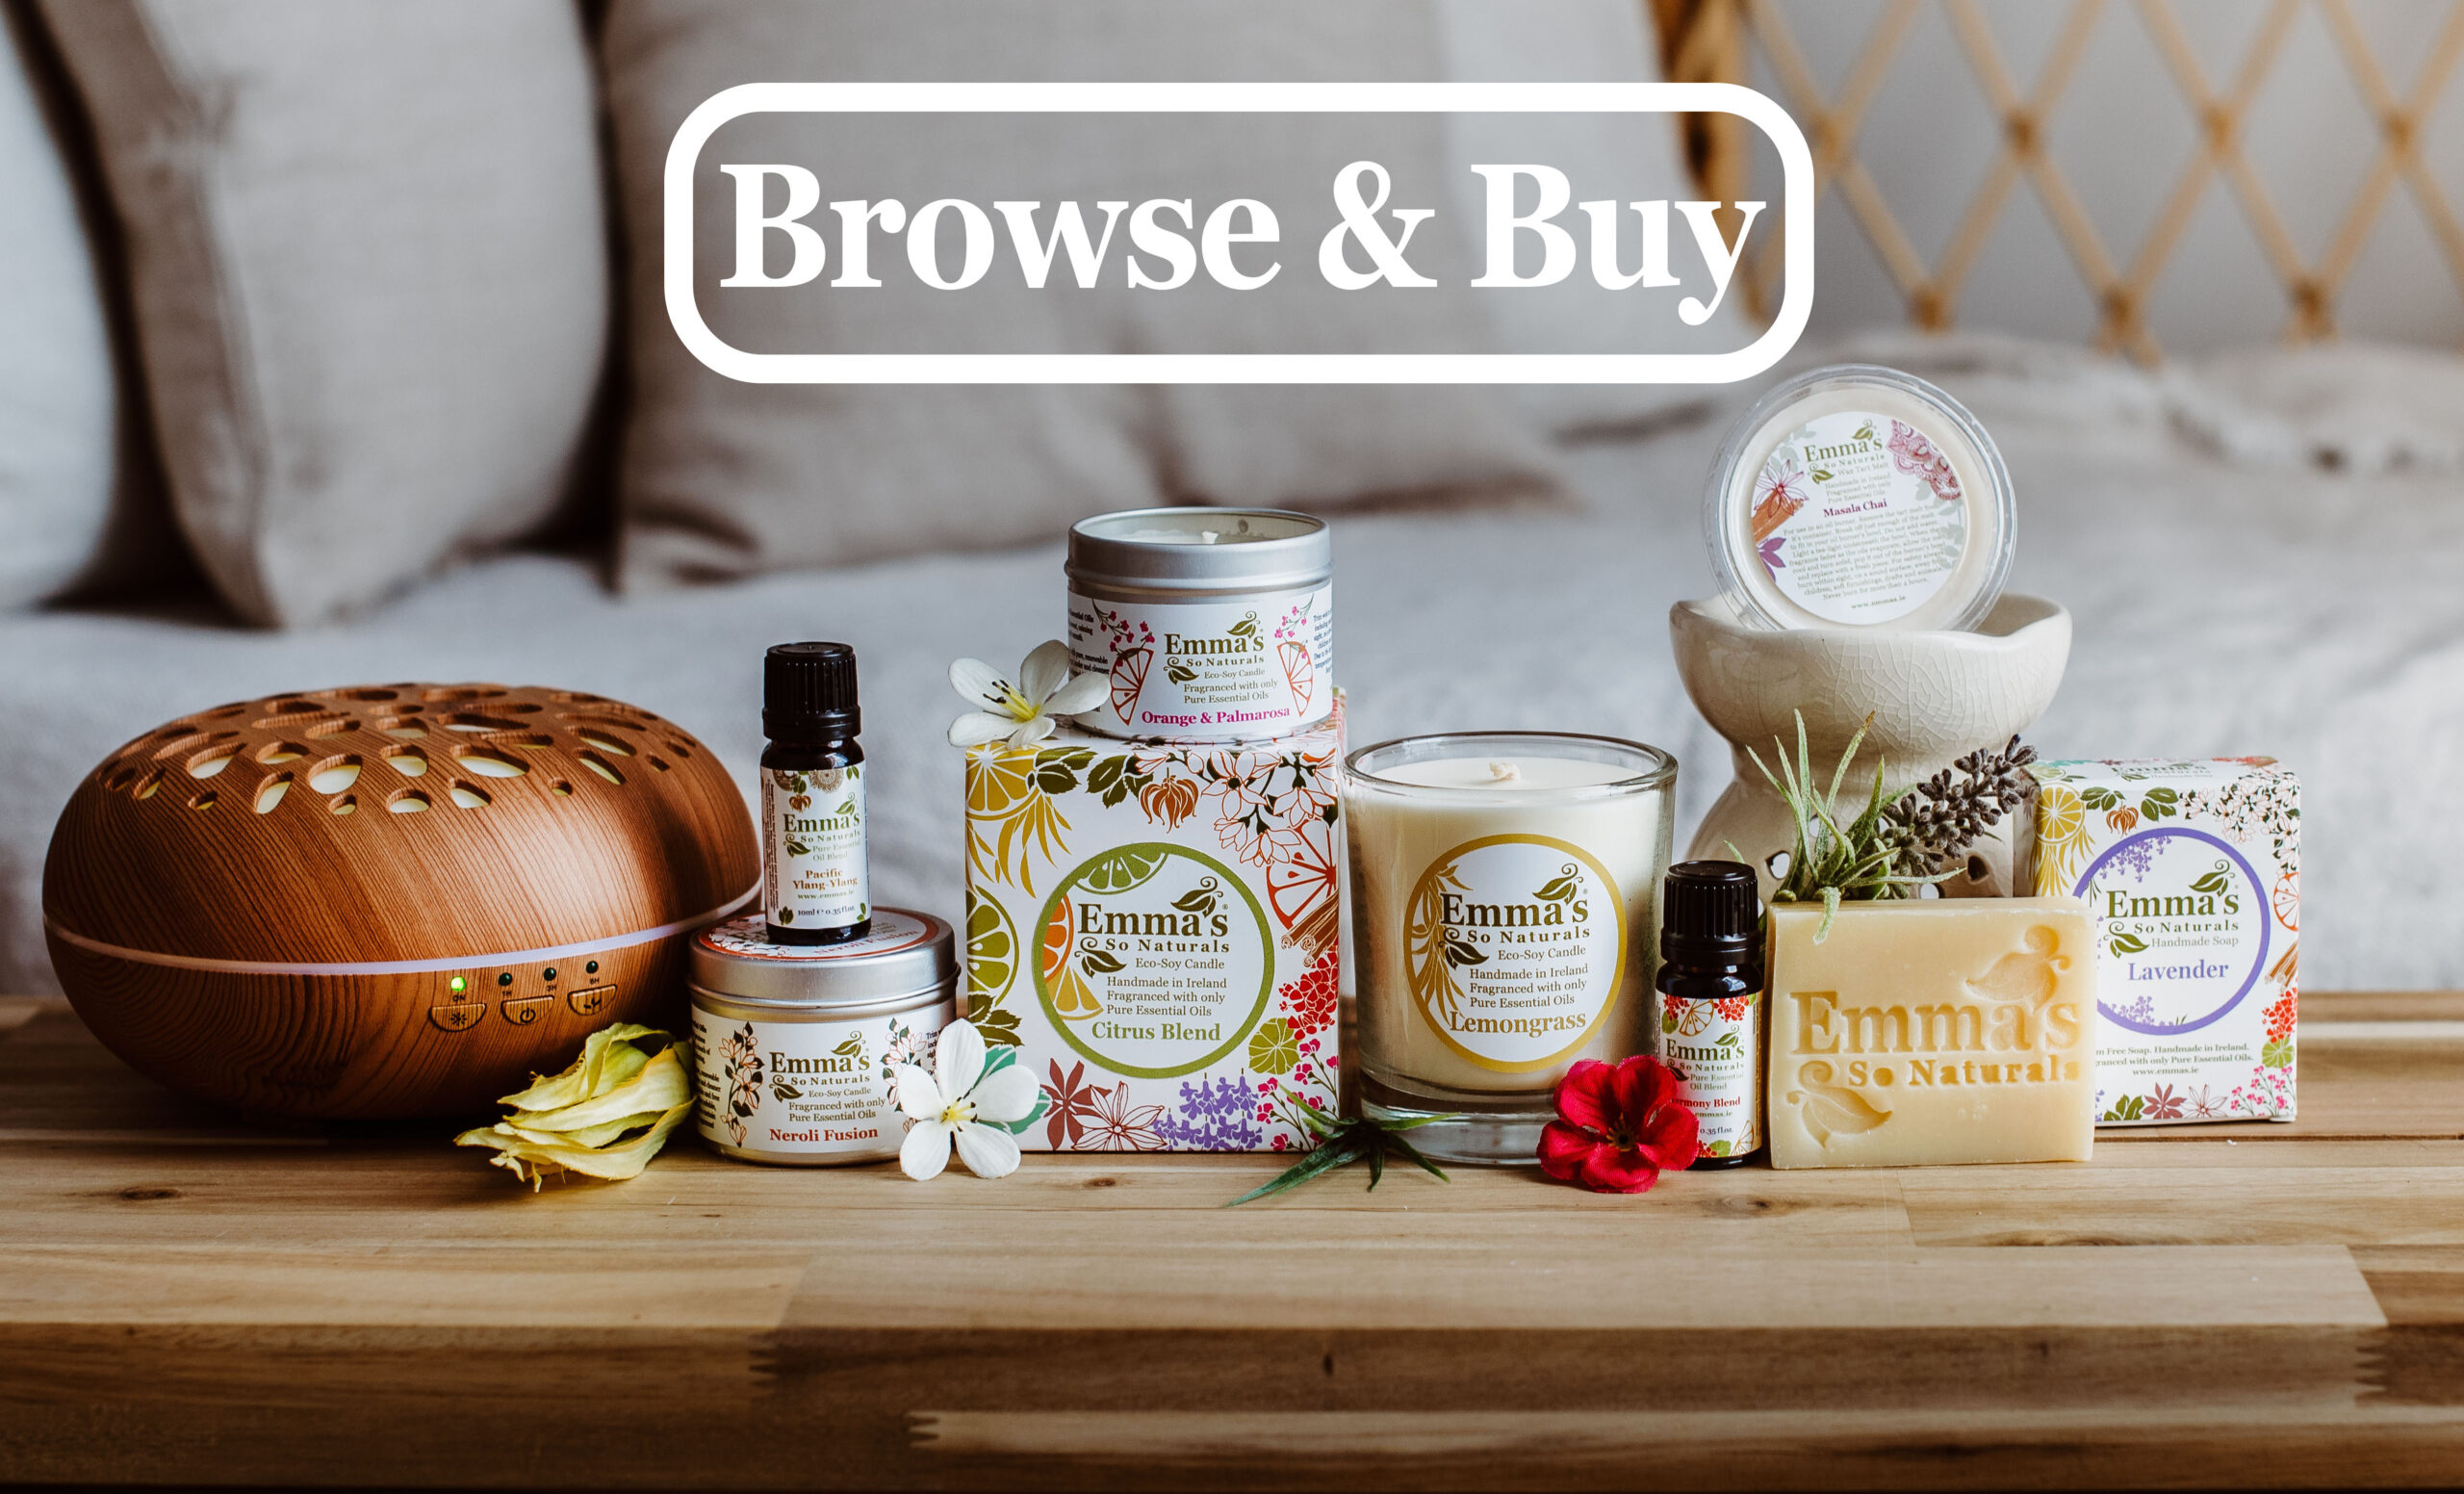 Emma's_So_Naturals_Candles _&Soap_Collection_Browse_&_Buy